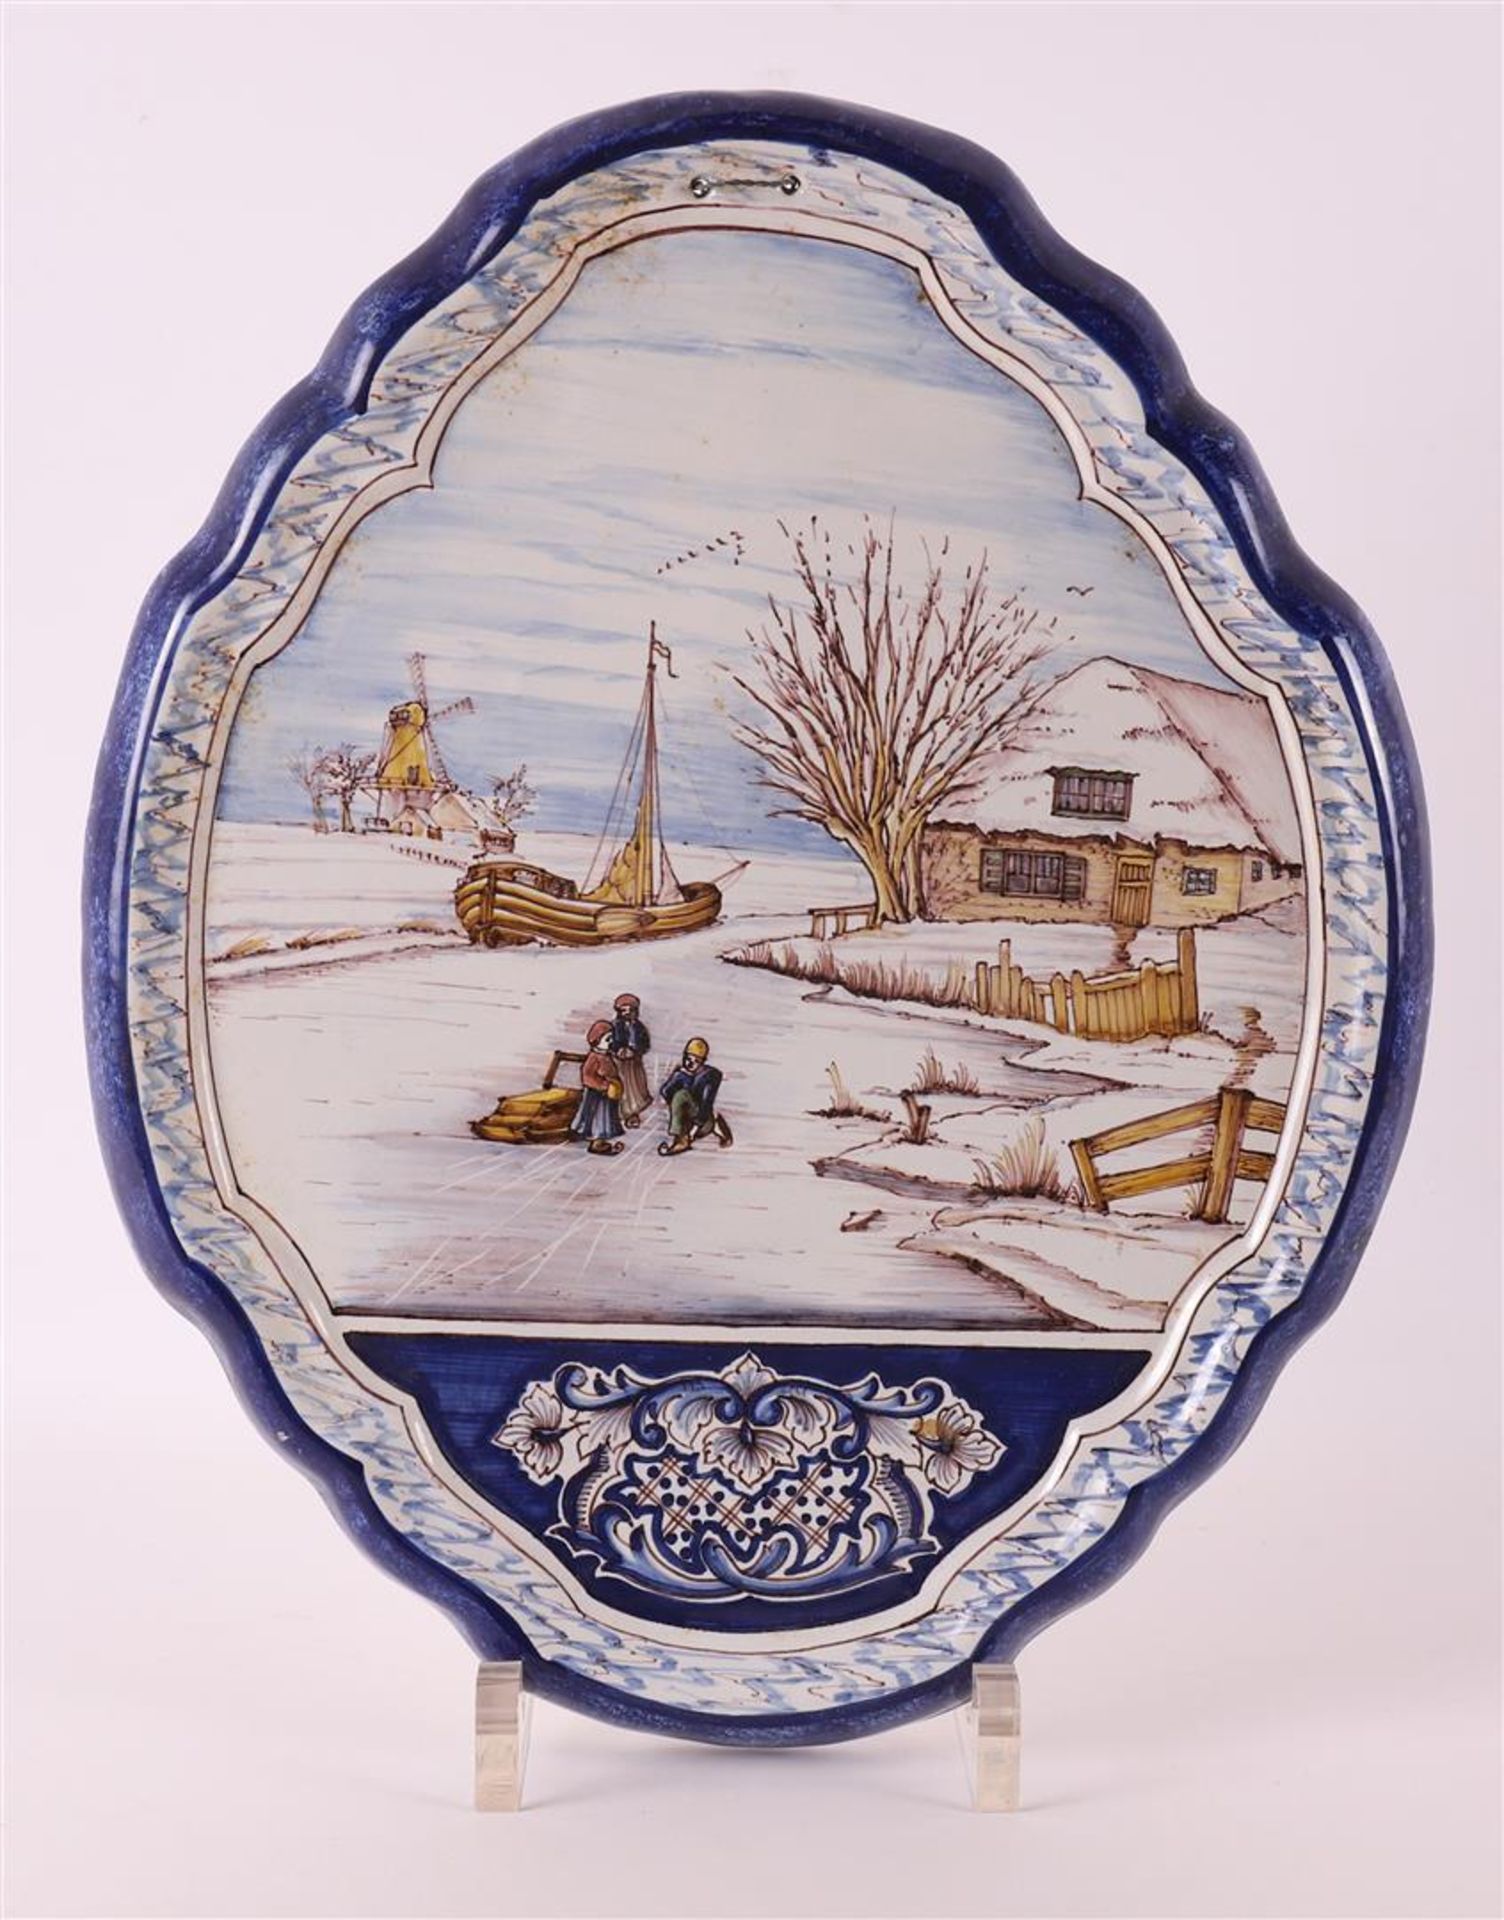 A polychrome earthenware plaque, Harlingen, 1st half of the 20th century. Decor of a Dutch winter